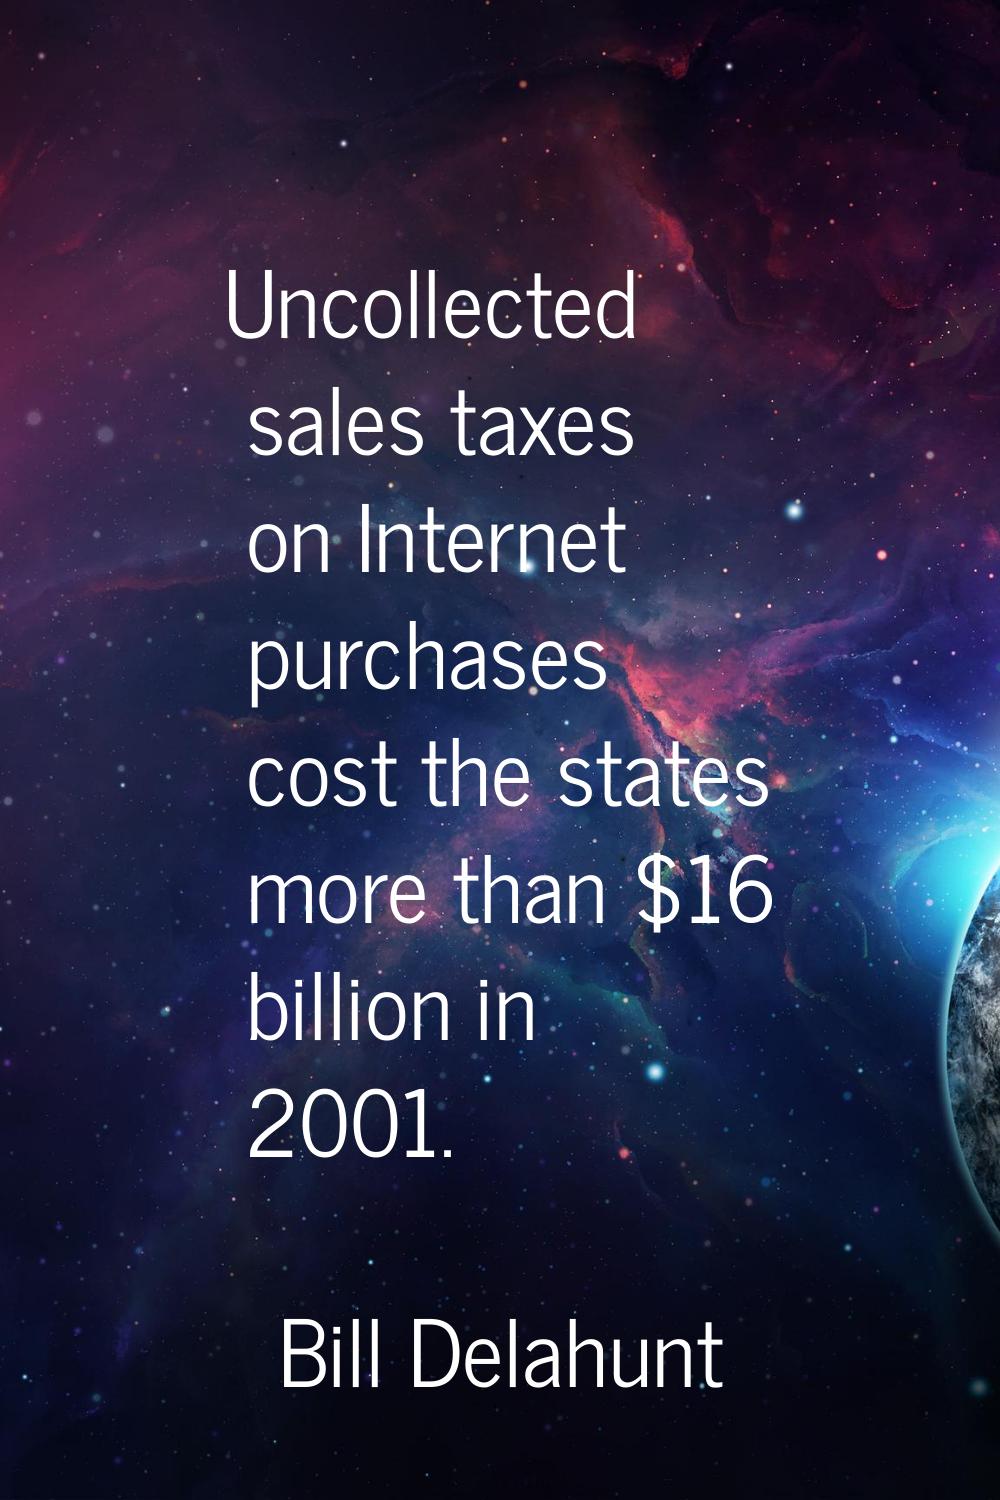 Uncollected sales taxes on Internet purchases cost the states more than $16 billion in 2001.